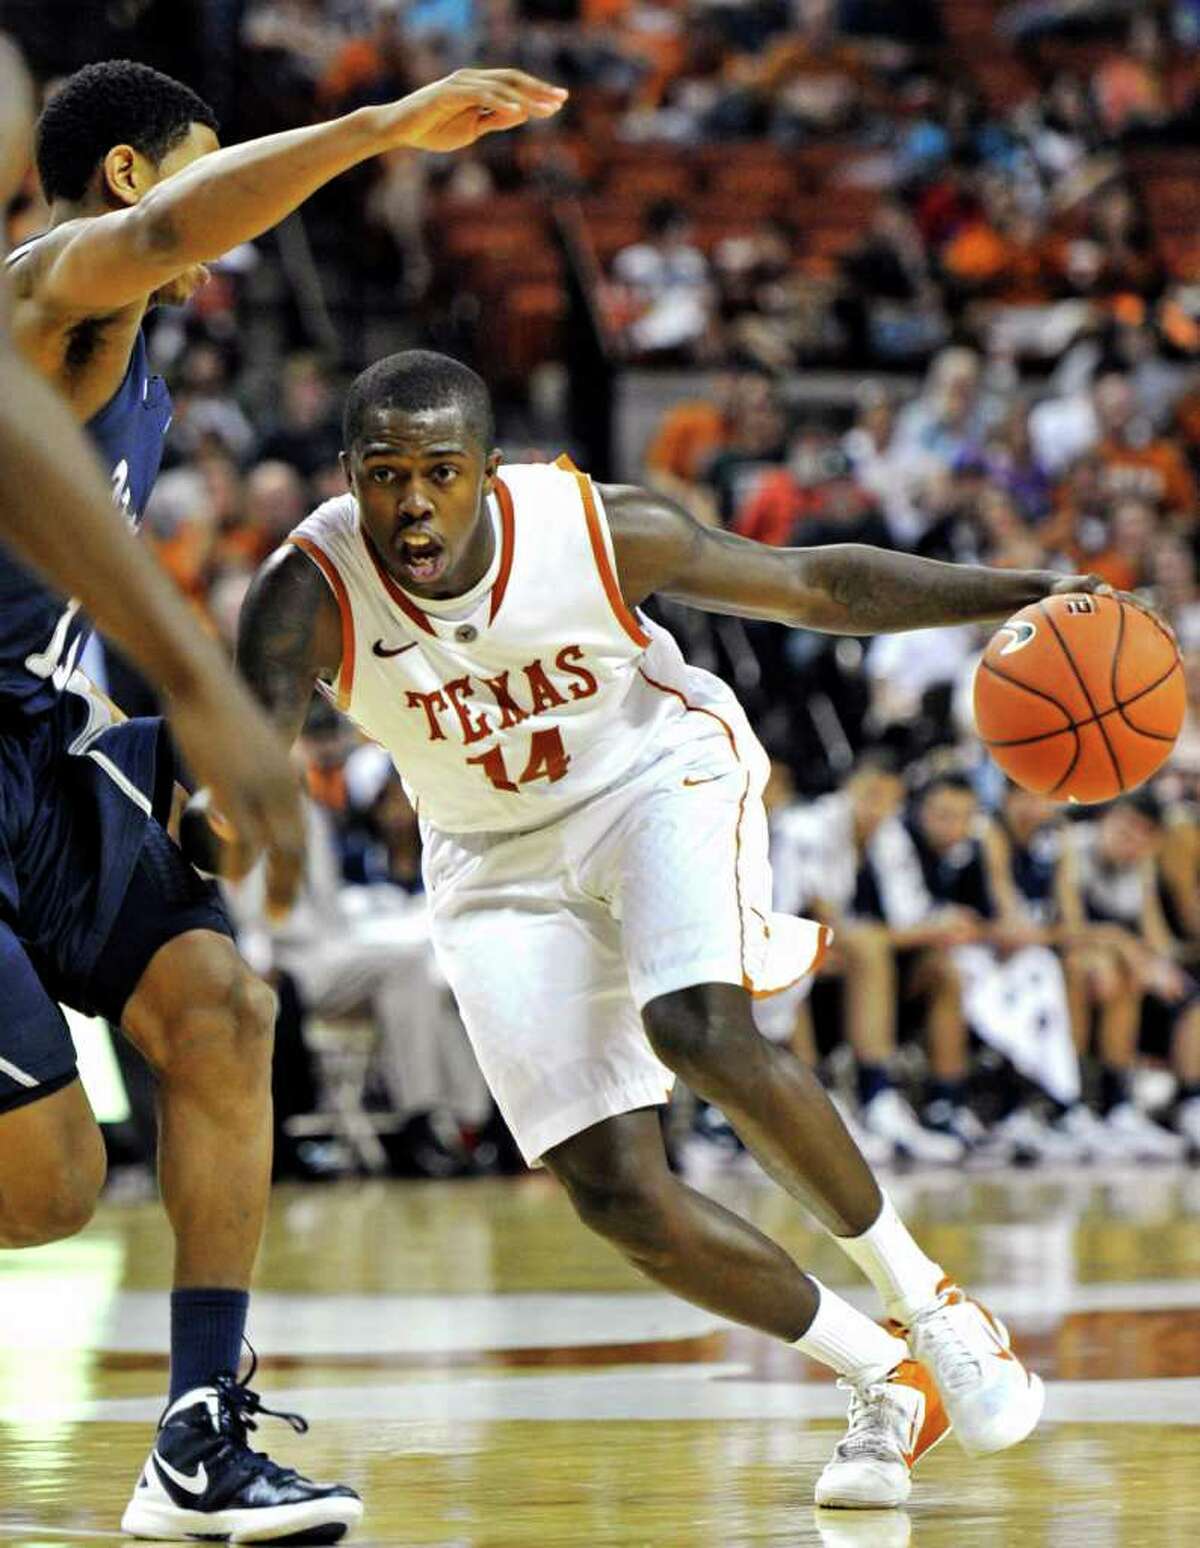 Guard J'Covan Brown and the Longhorns hope to snap a two-game losing streak when they meet No. 7 Kansas on Saturday in Austin.